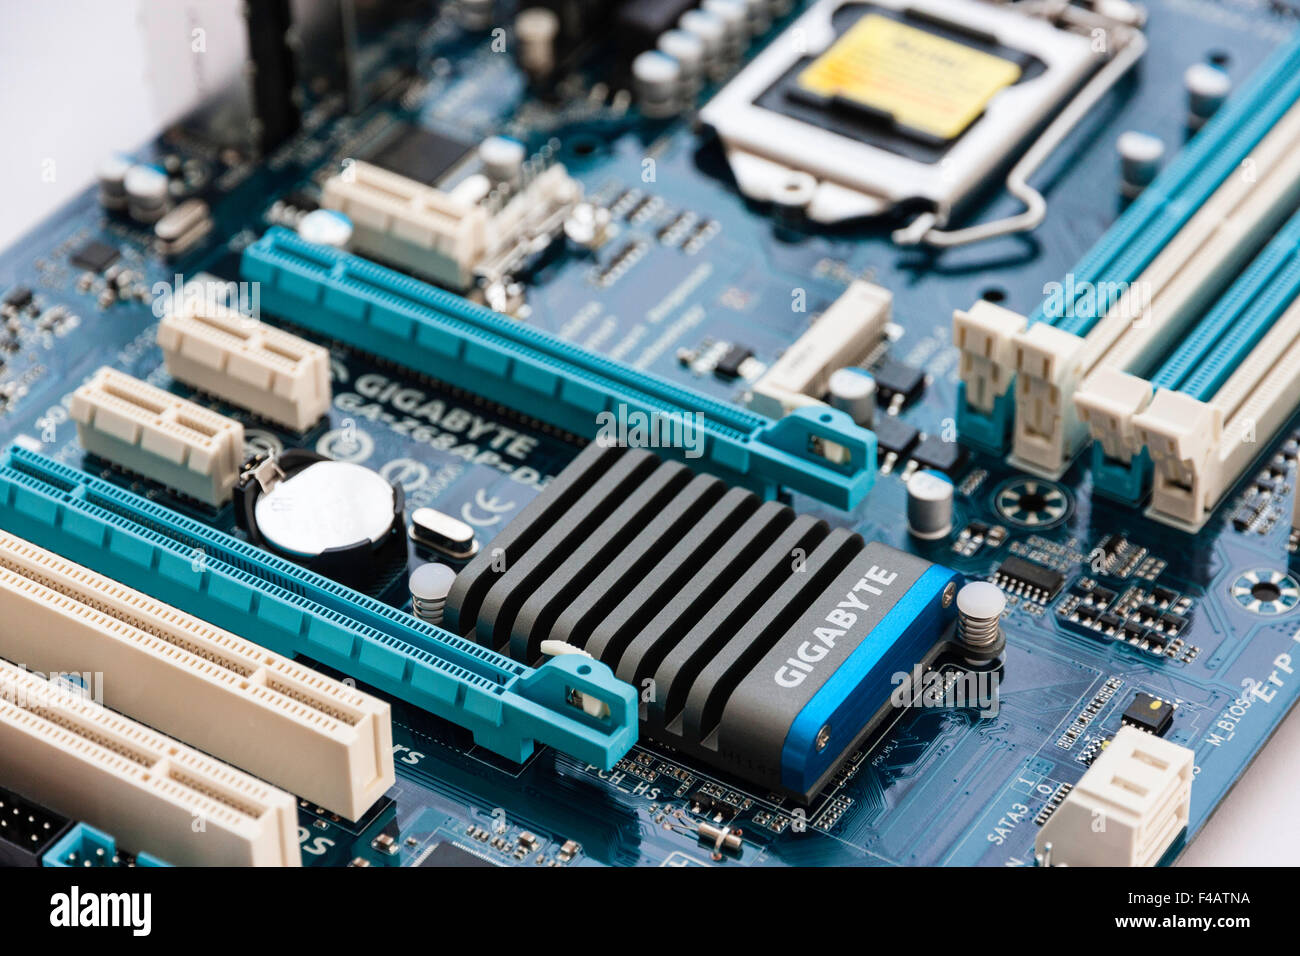 Computer motherboard showing PCI expansion slots, top of closed chip socket, Ram slots for memory and Gigabyte processor. Stock Photo